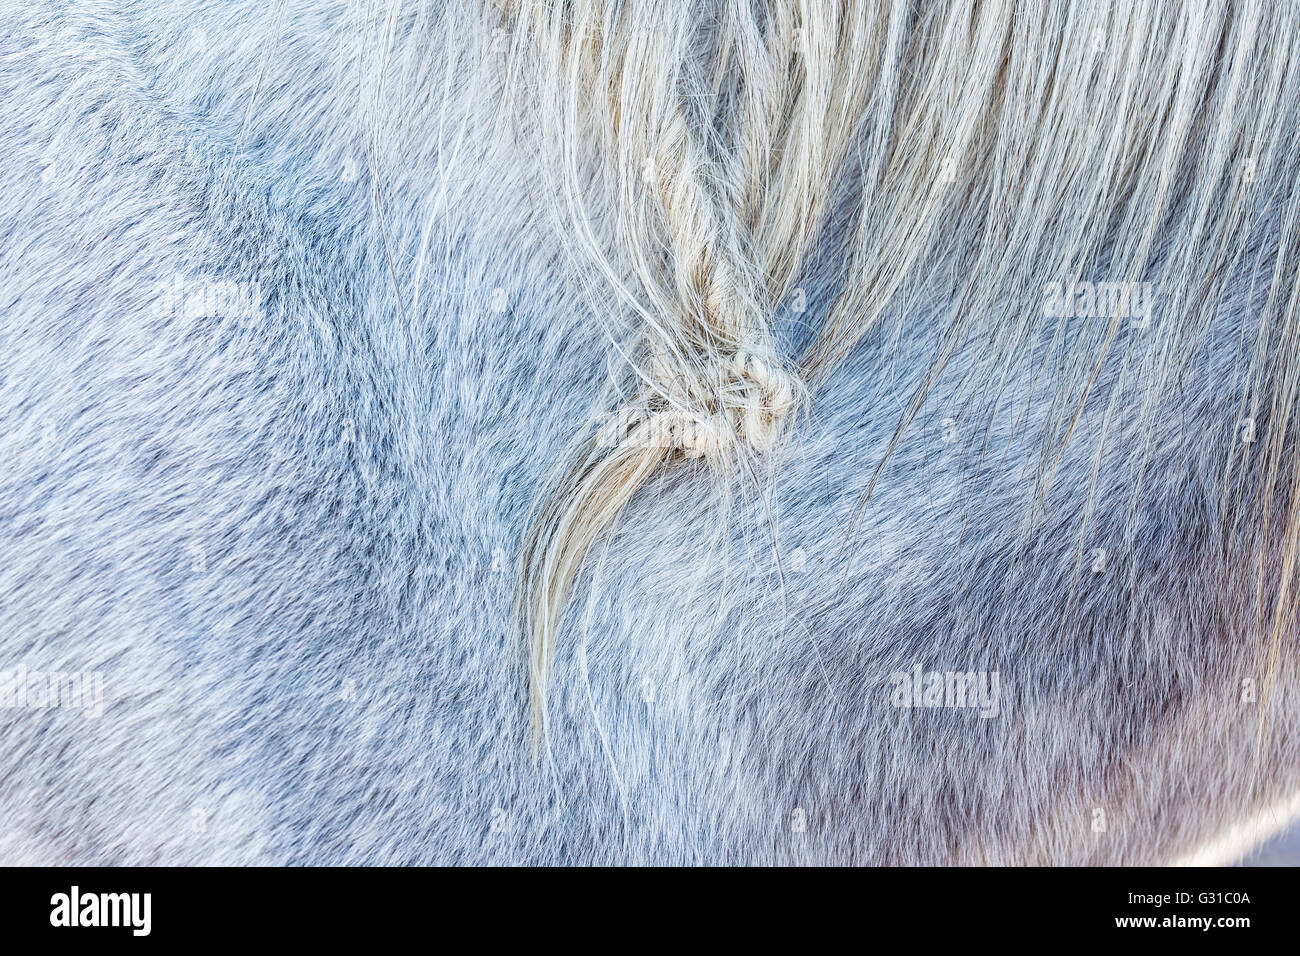 Close-up of fur of a white horse with braid Stock Photo